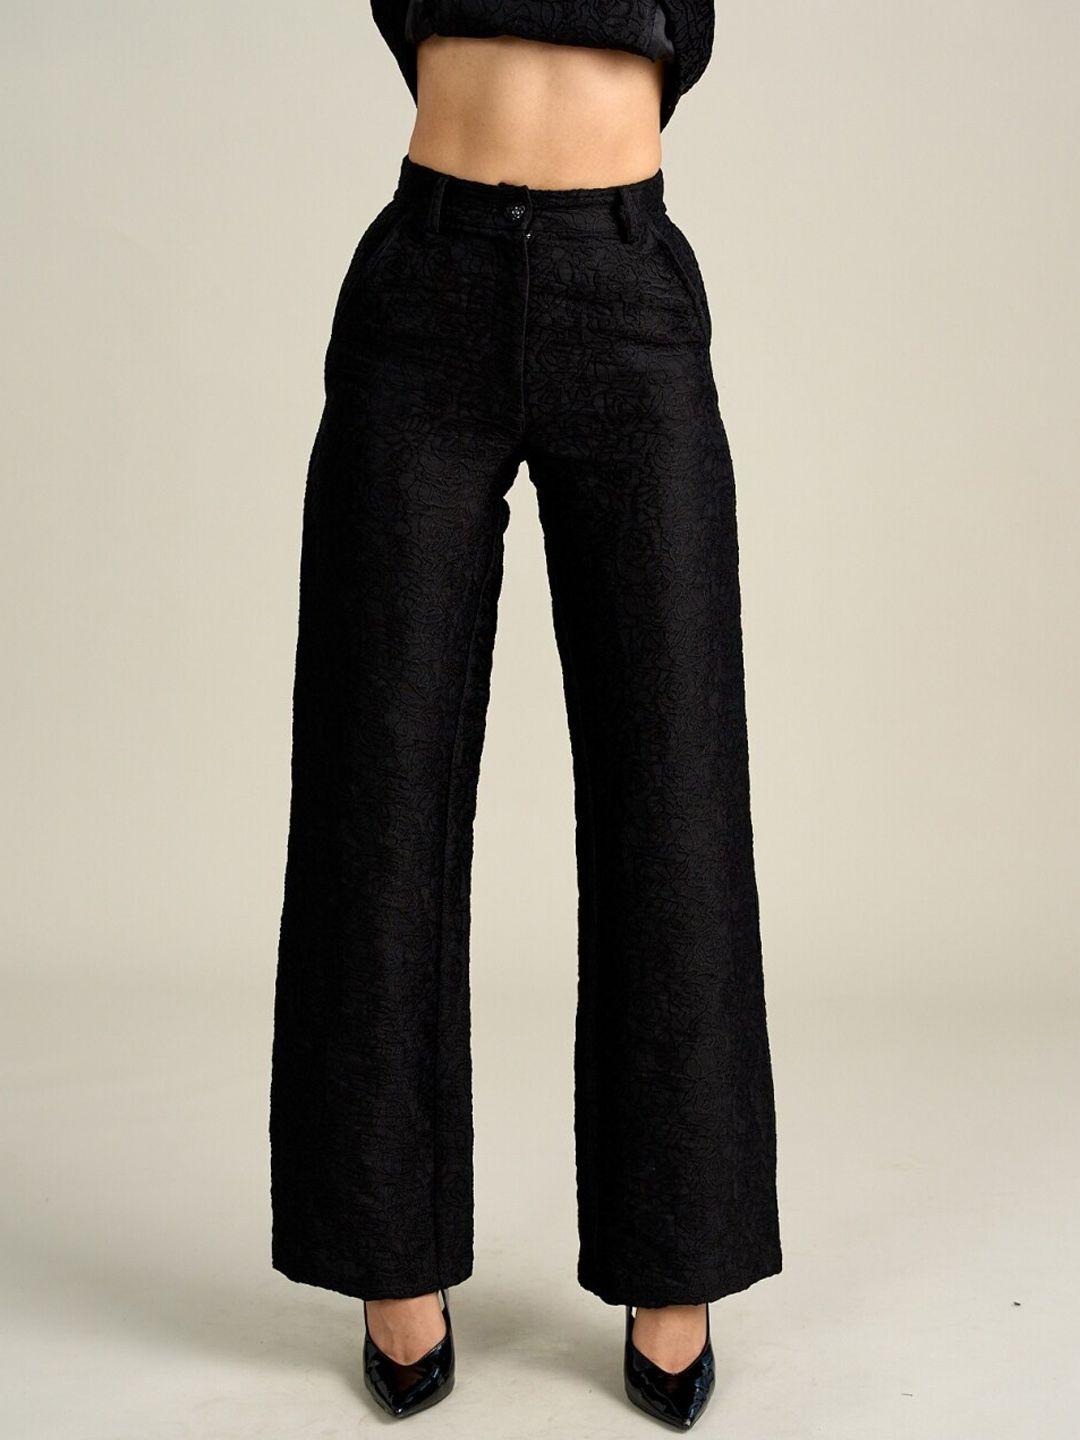 style island megan woven design relaxed fit bootcut trouser